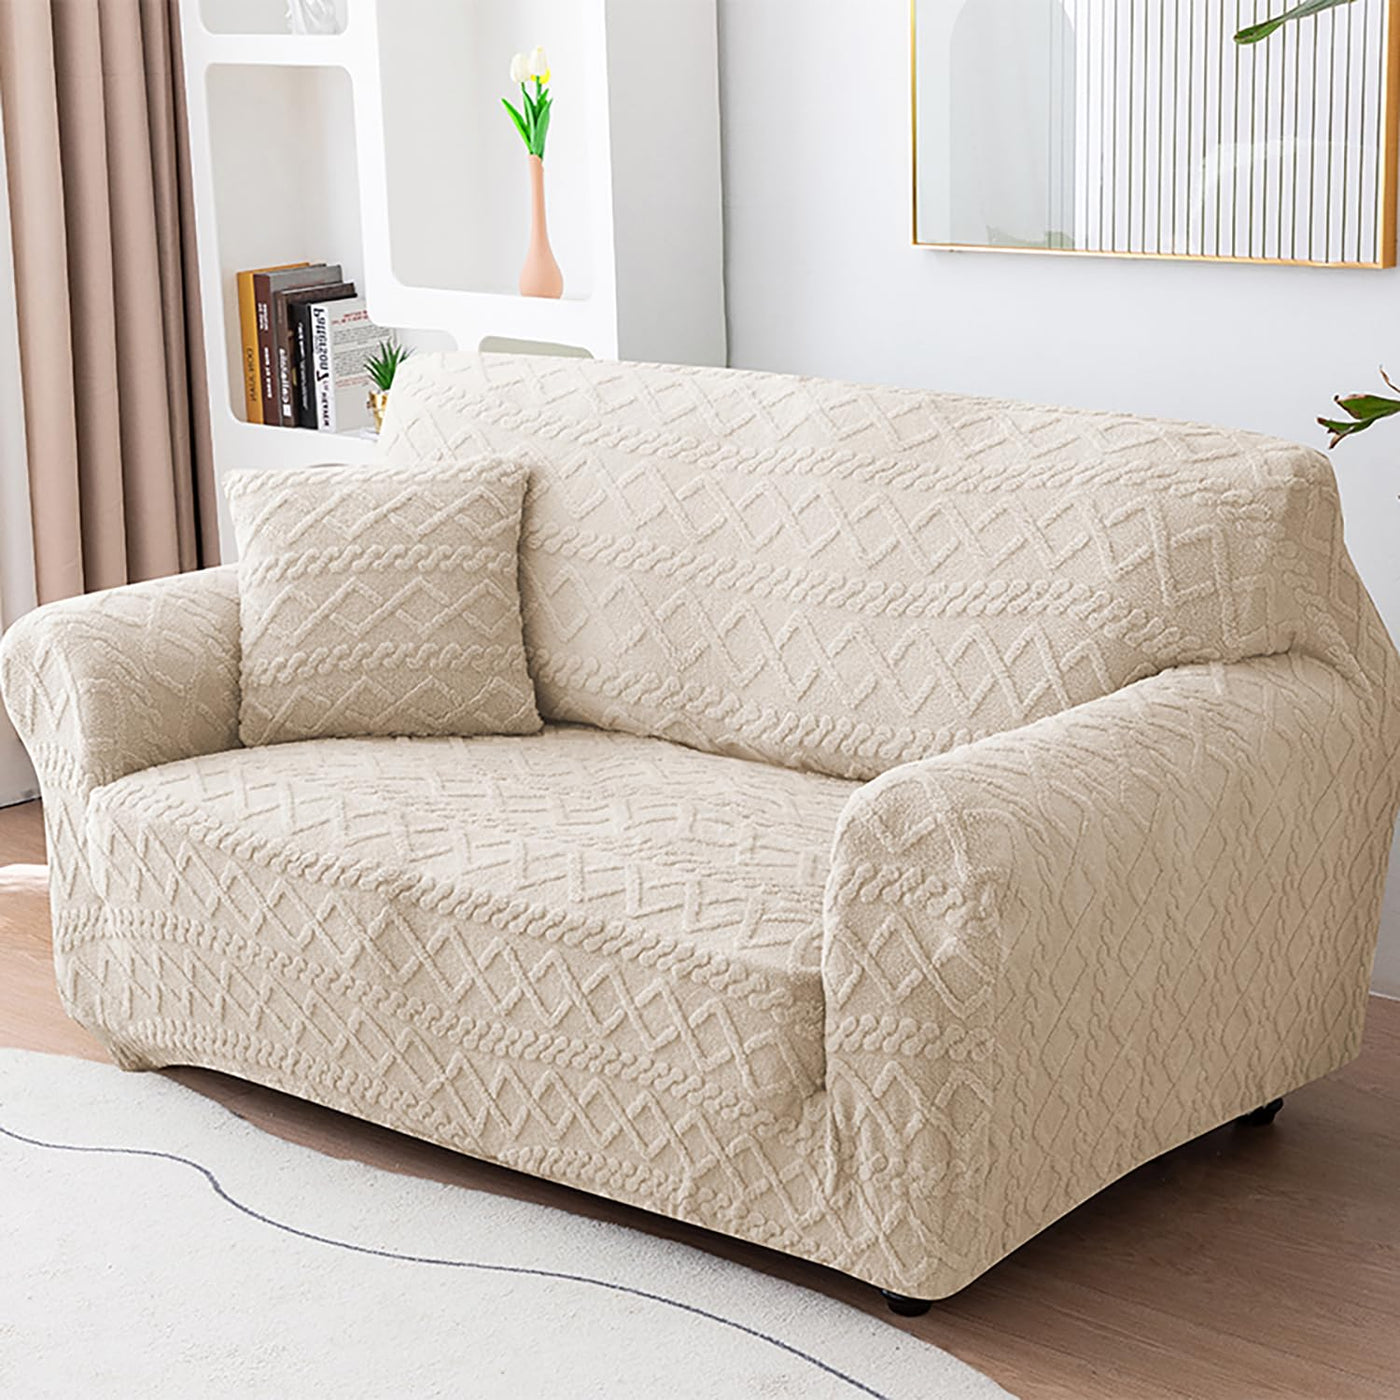 Universal Couch Cover-Beige